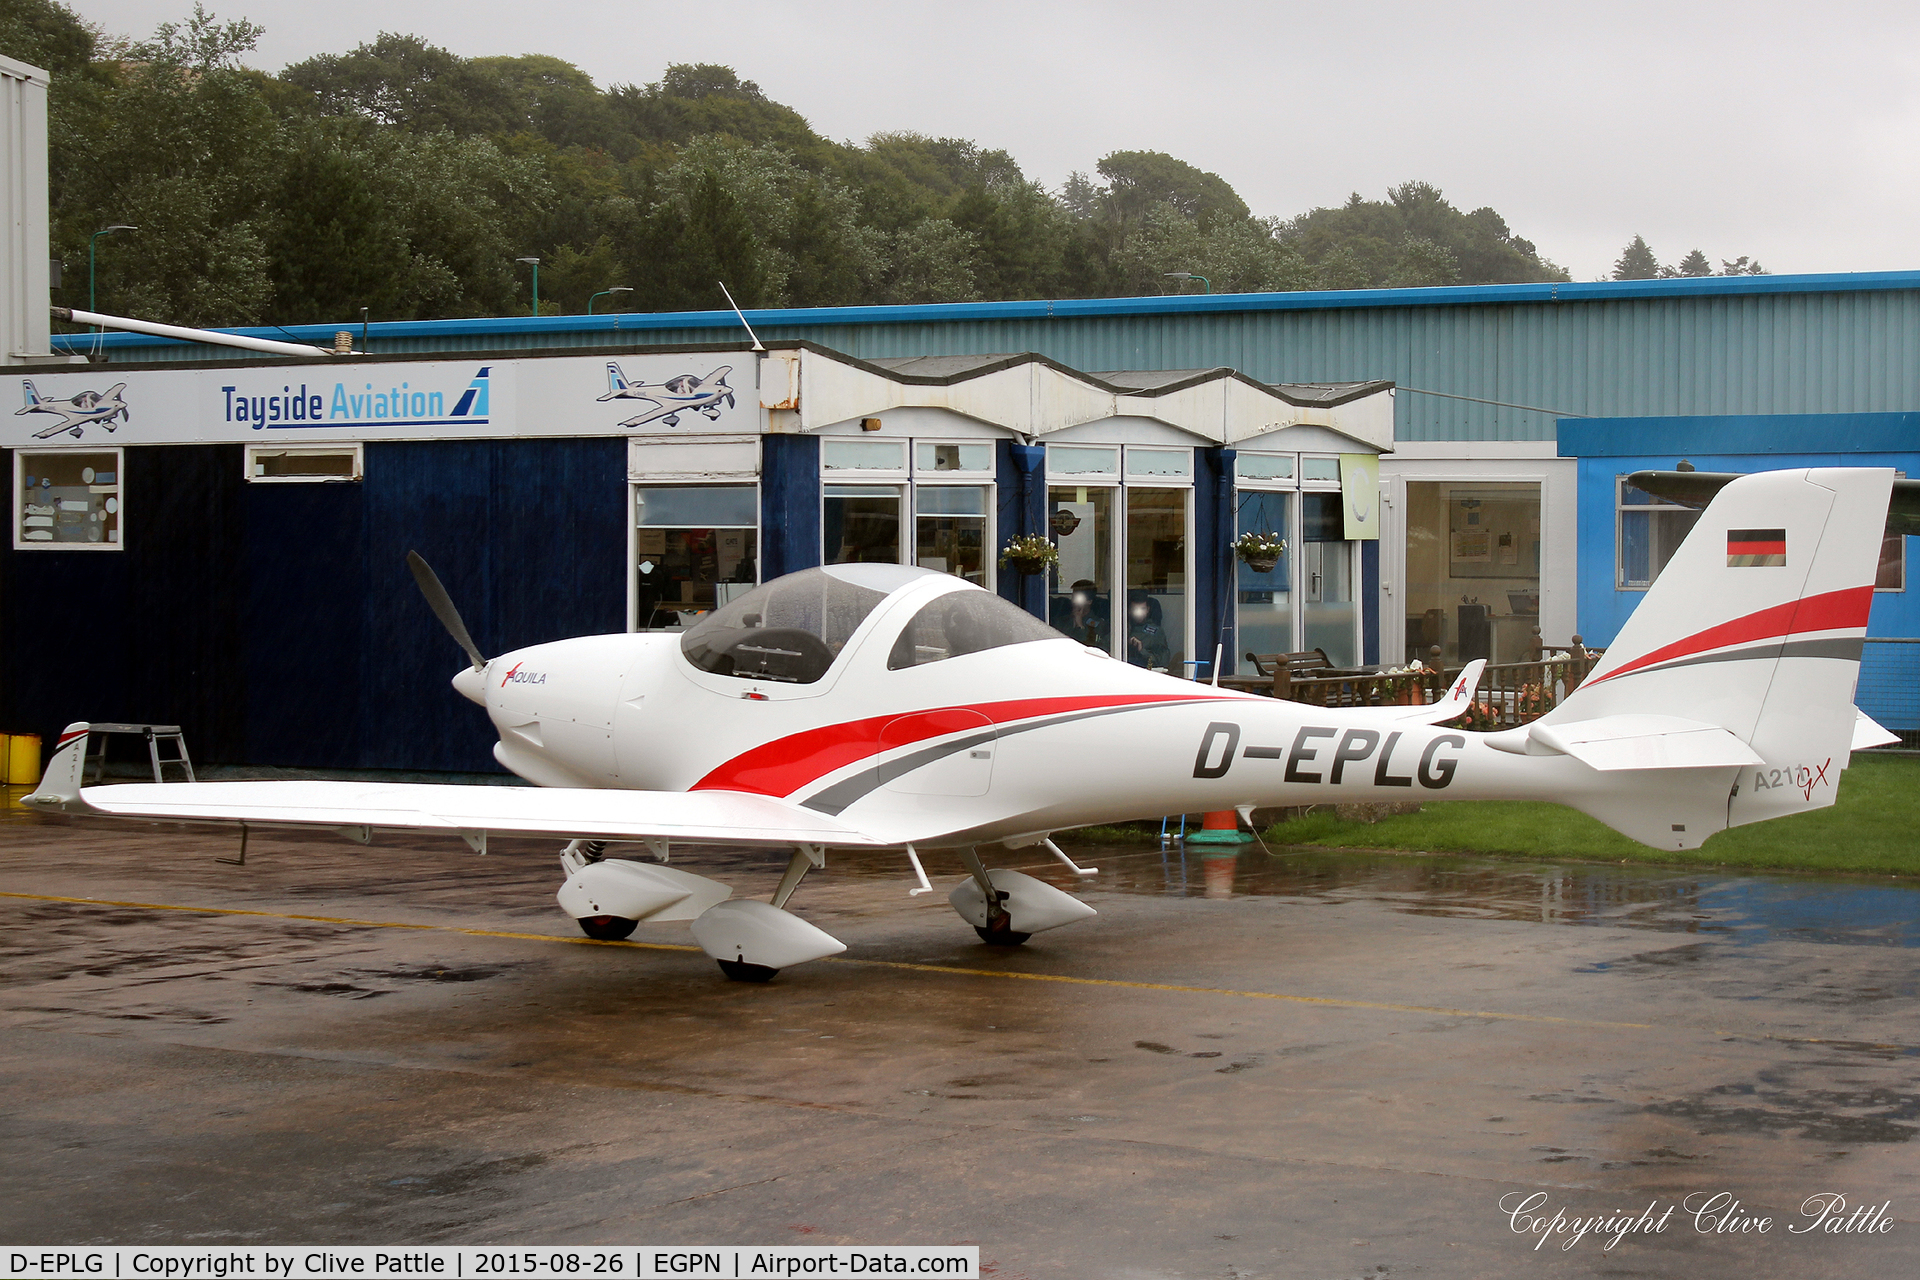 D-EPLG, 2014 Aquila A211 C/N AT01-100C-315, Pictured visiting Tayside Aviation at Dundee Riverside airport EGPN. Could it be on a demo visit or perhaps a new acquisition or .... just visiting. Time will tell.